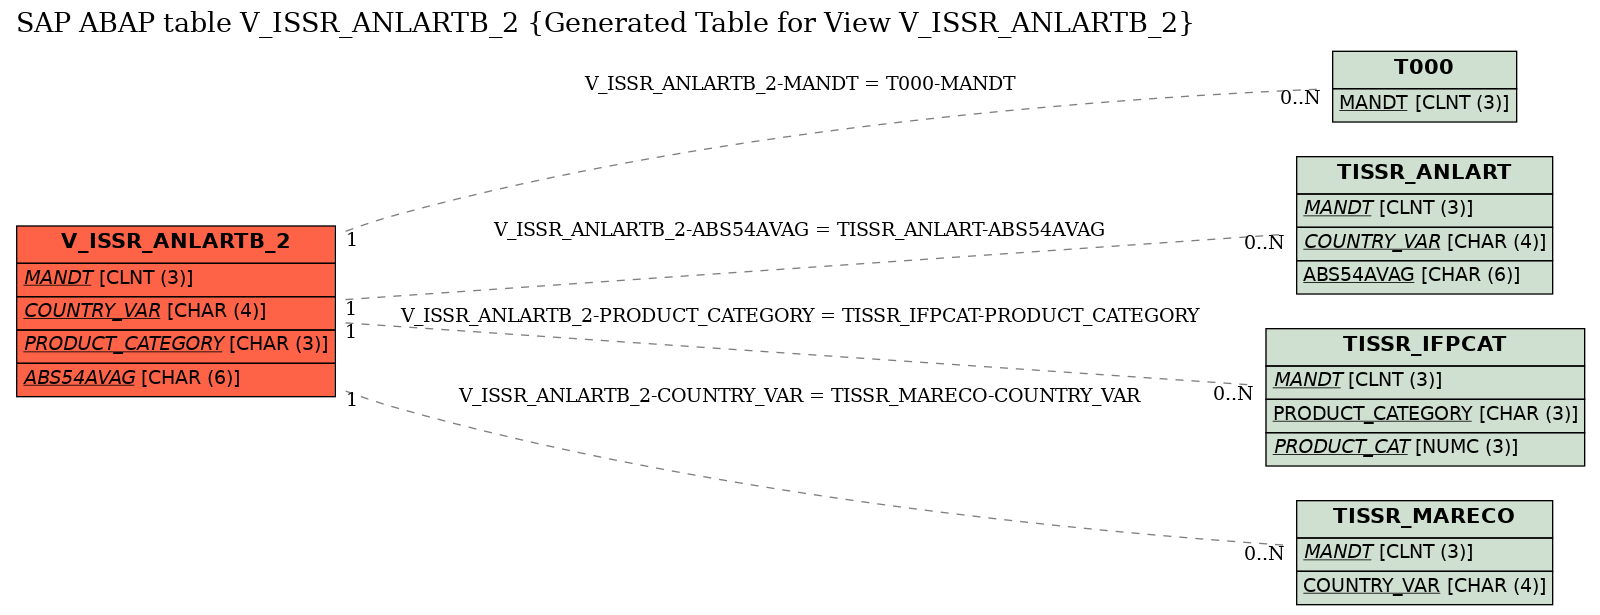 E-R Diagram for table V_ISSR_ANLARTB_2 (Generated Table for View V_ISSR_ANLARTB_2)